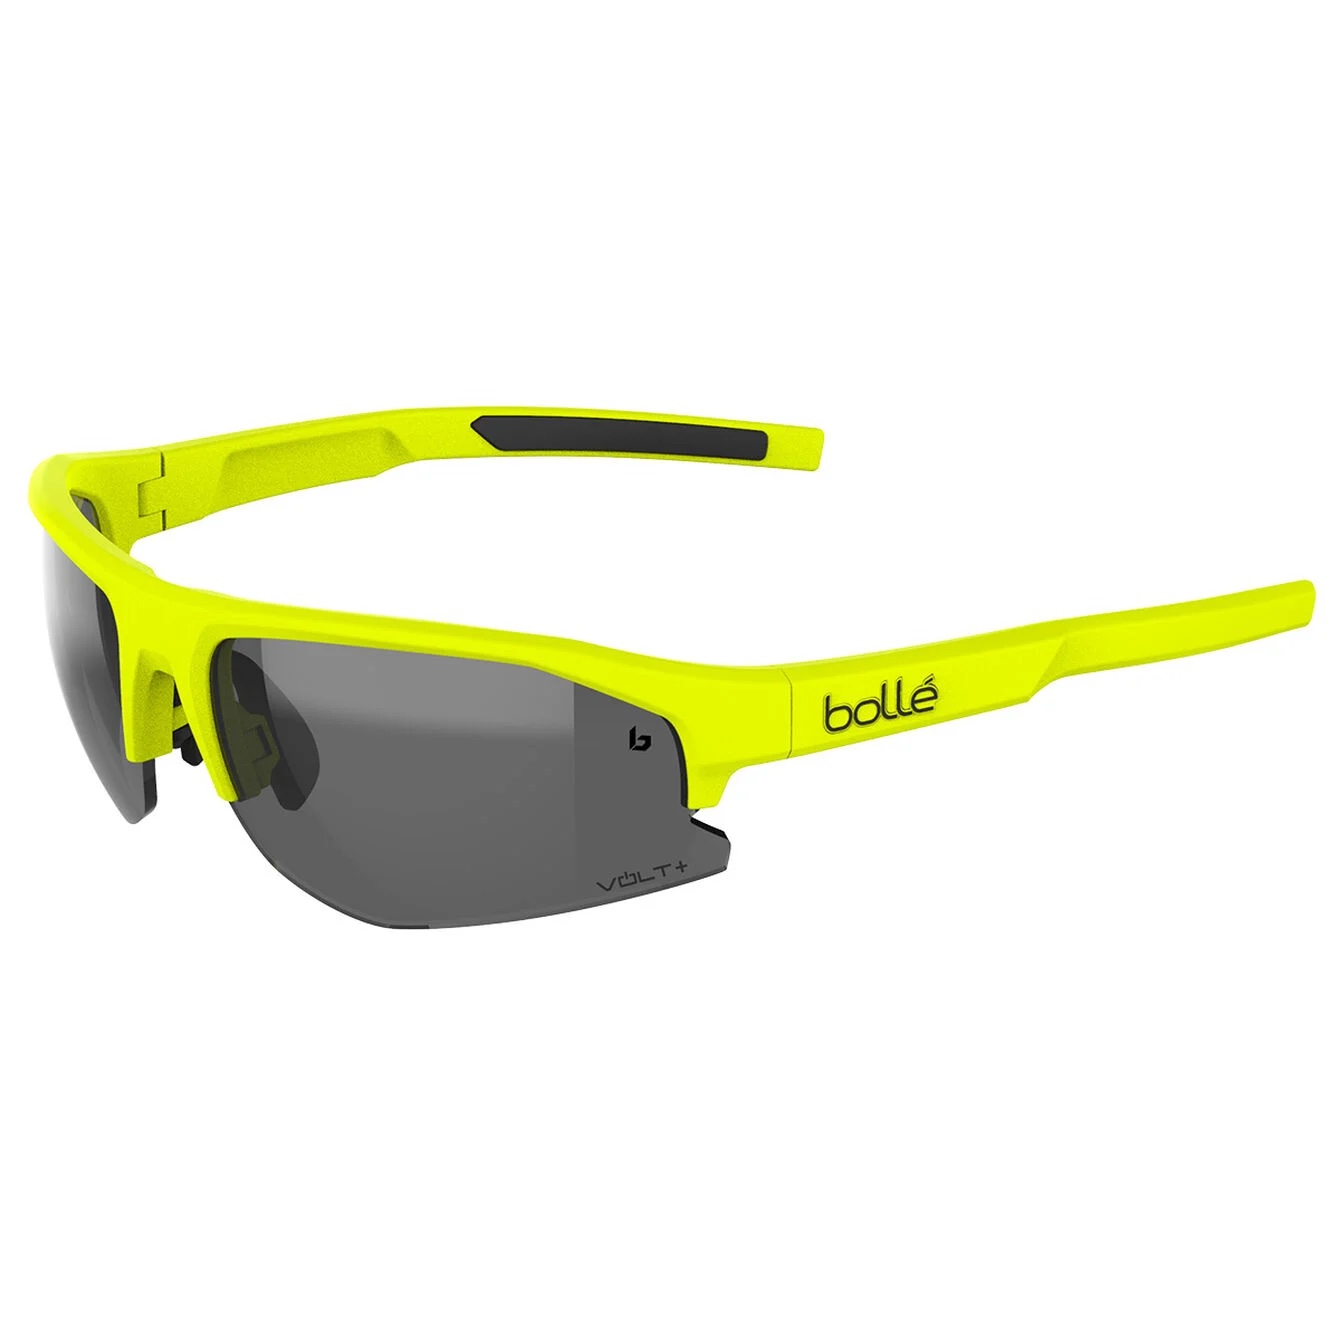 Trendy Tennis - Tennis Fashion Blog: Tennis Sunglasses: To Wear or Not to  Wear